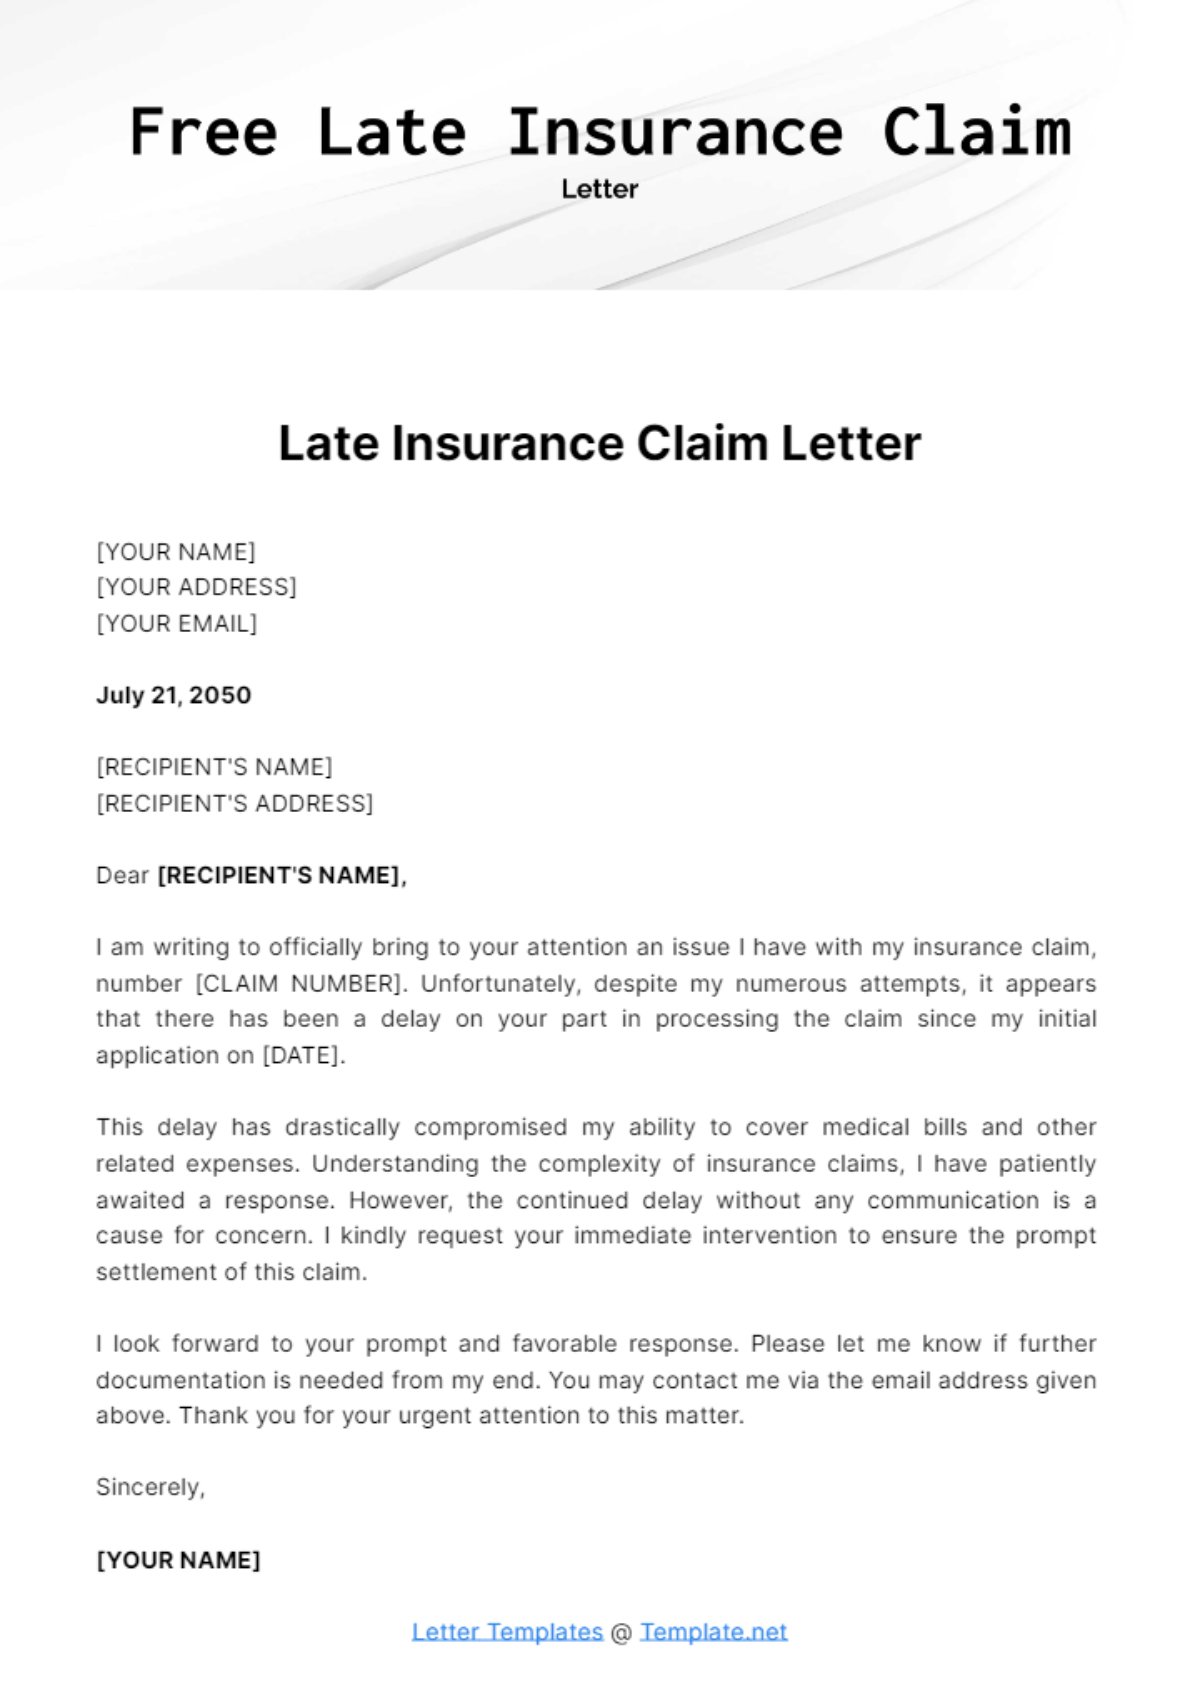 Late Insurance Claim Letter Template